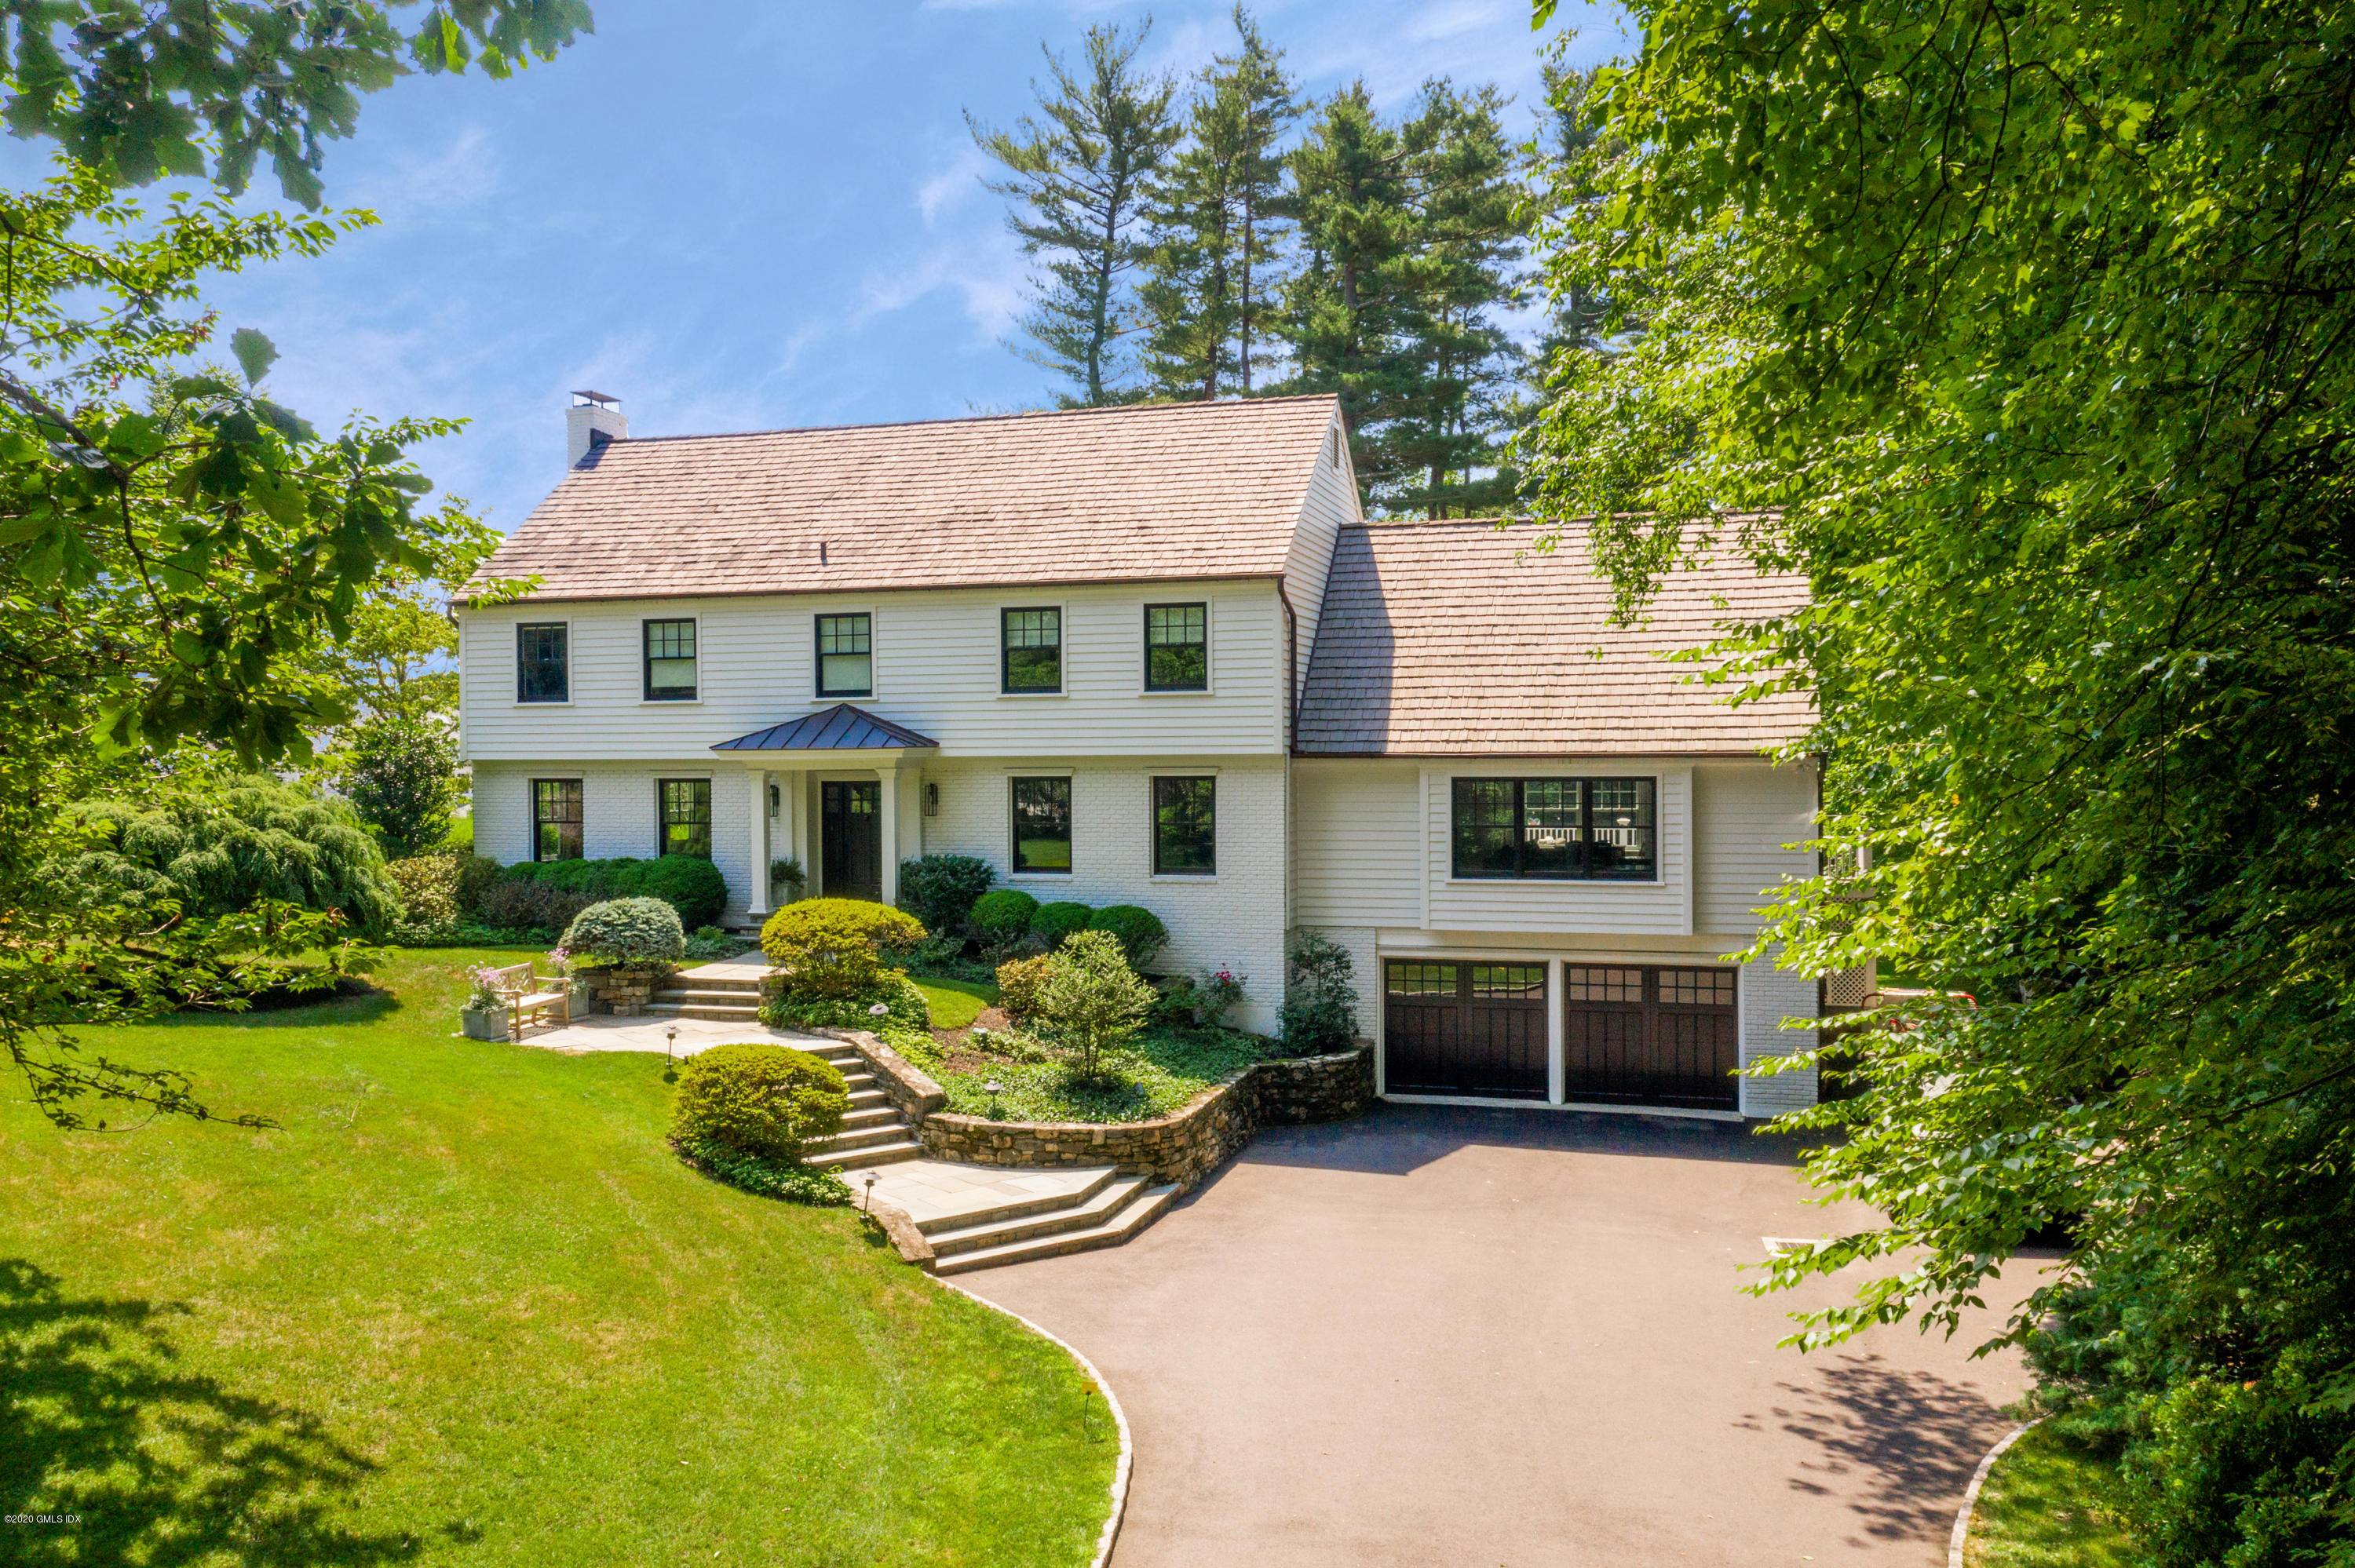 Beautifully set back off of Dingletown Road this private inviting five bedroom home with an idyllic backyard retreat nestled on 1.